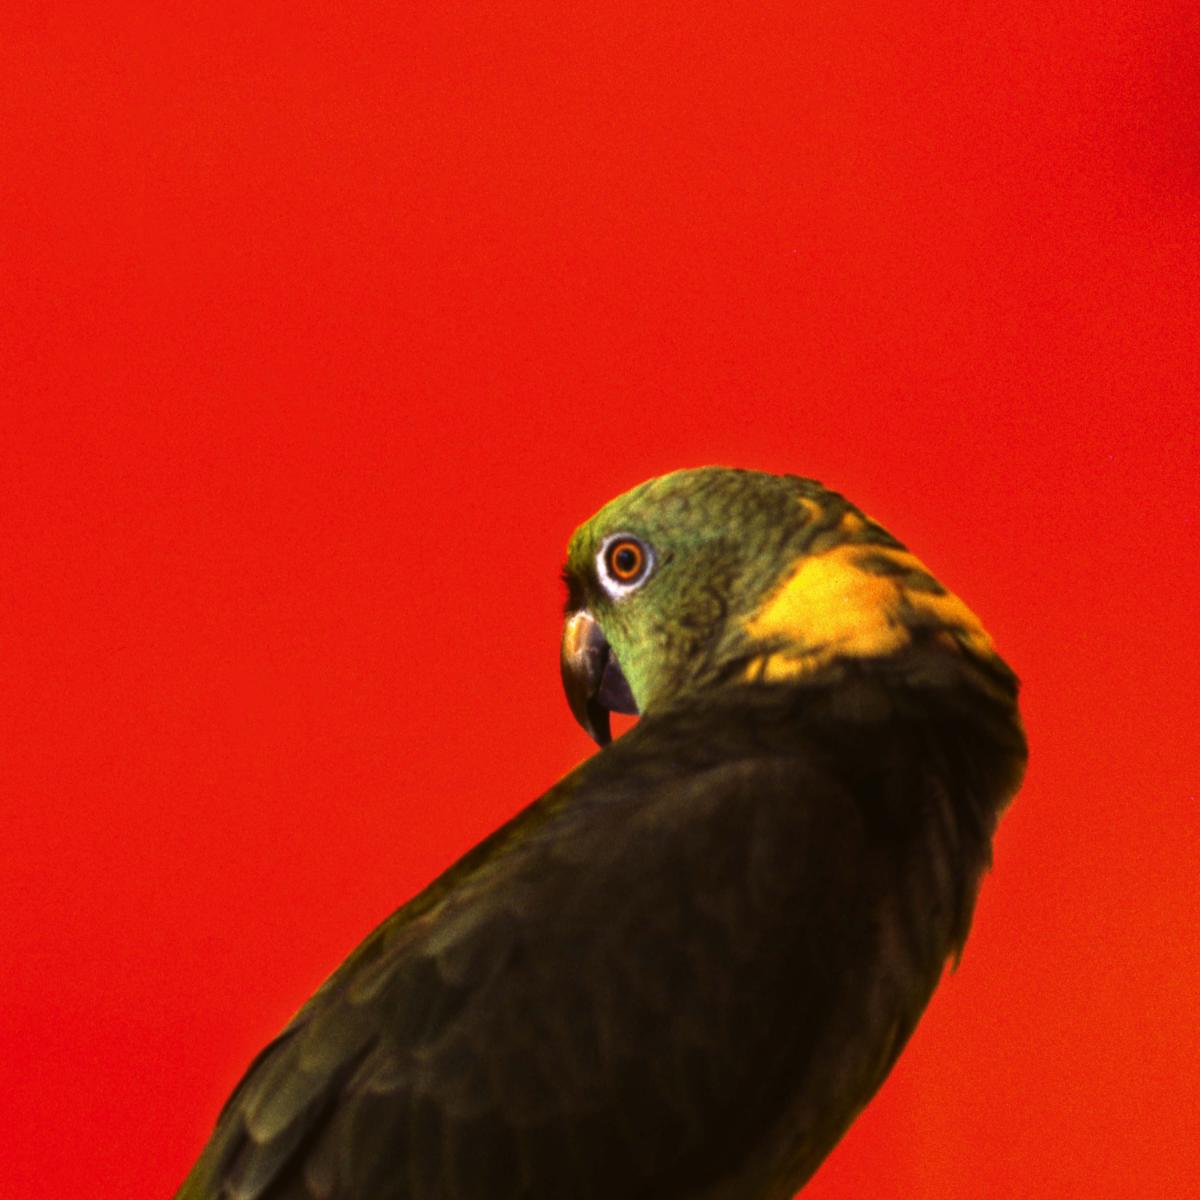 A green parrot in front of a large red background.